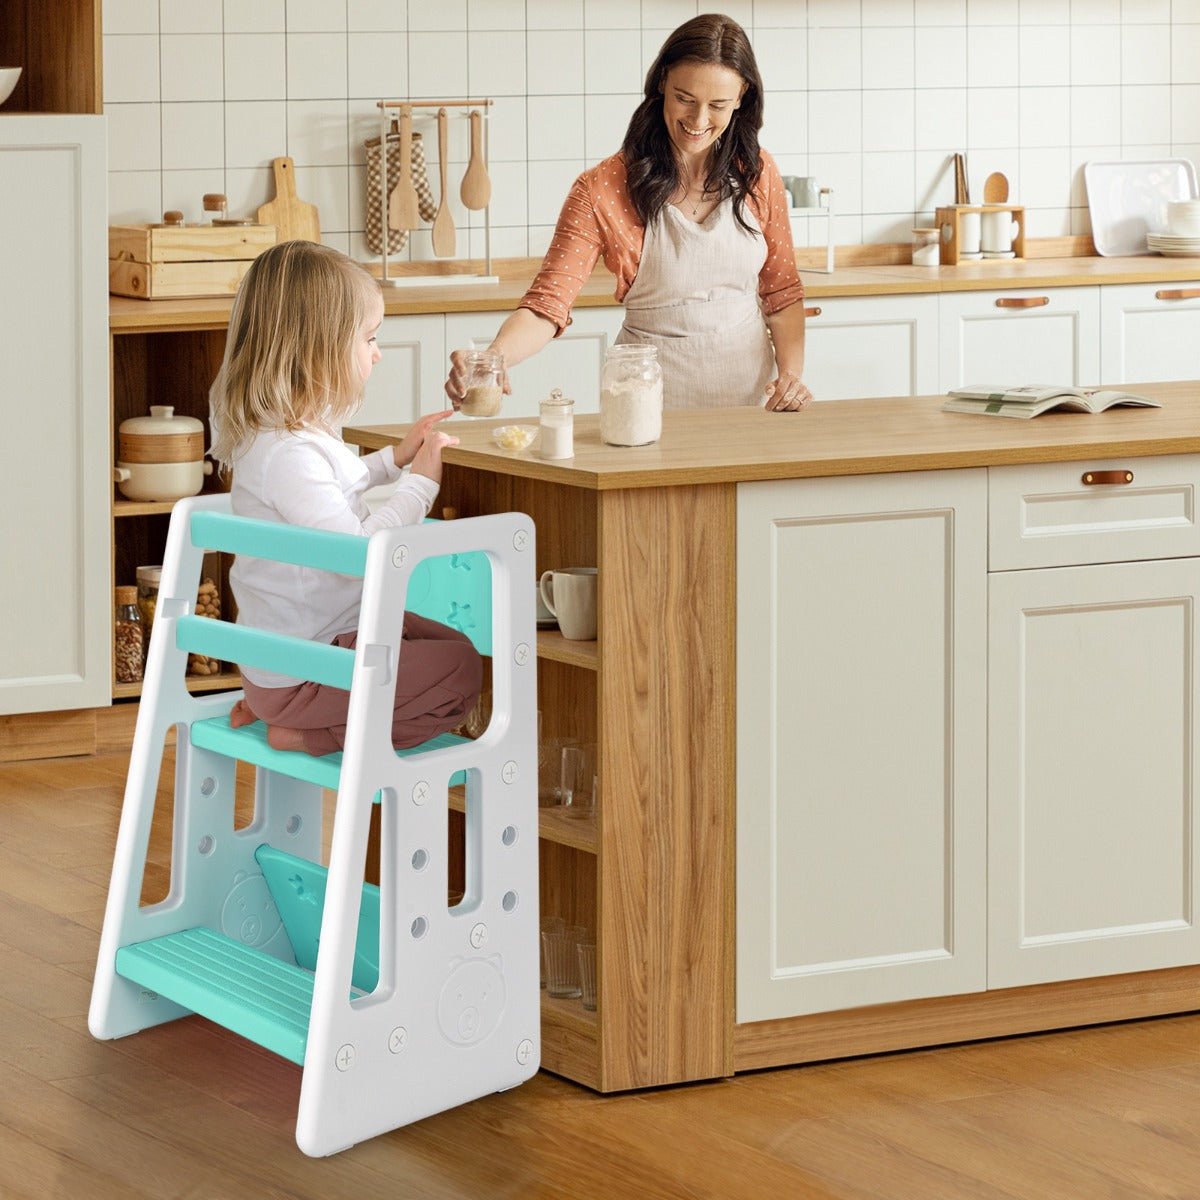 Kids Step Stool - Green Learning Aid with Dual Safety Rails for Toddlers